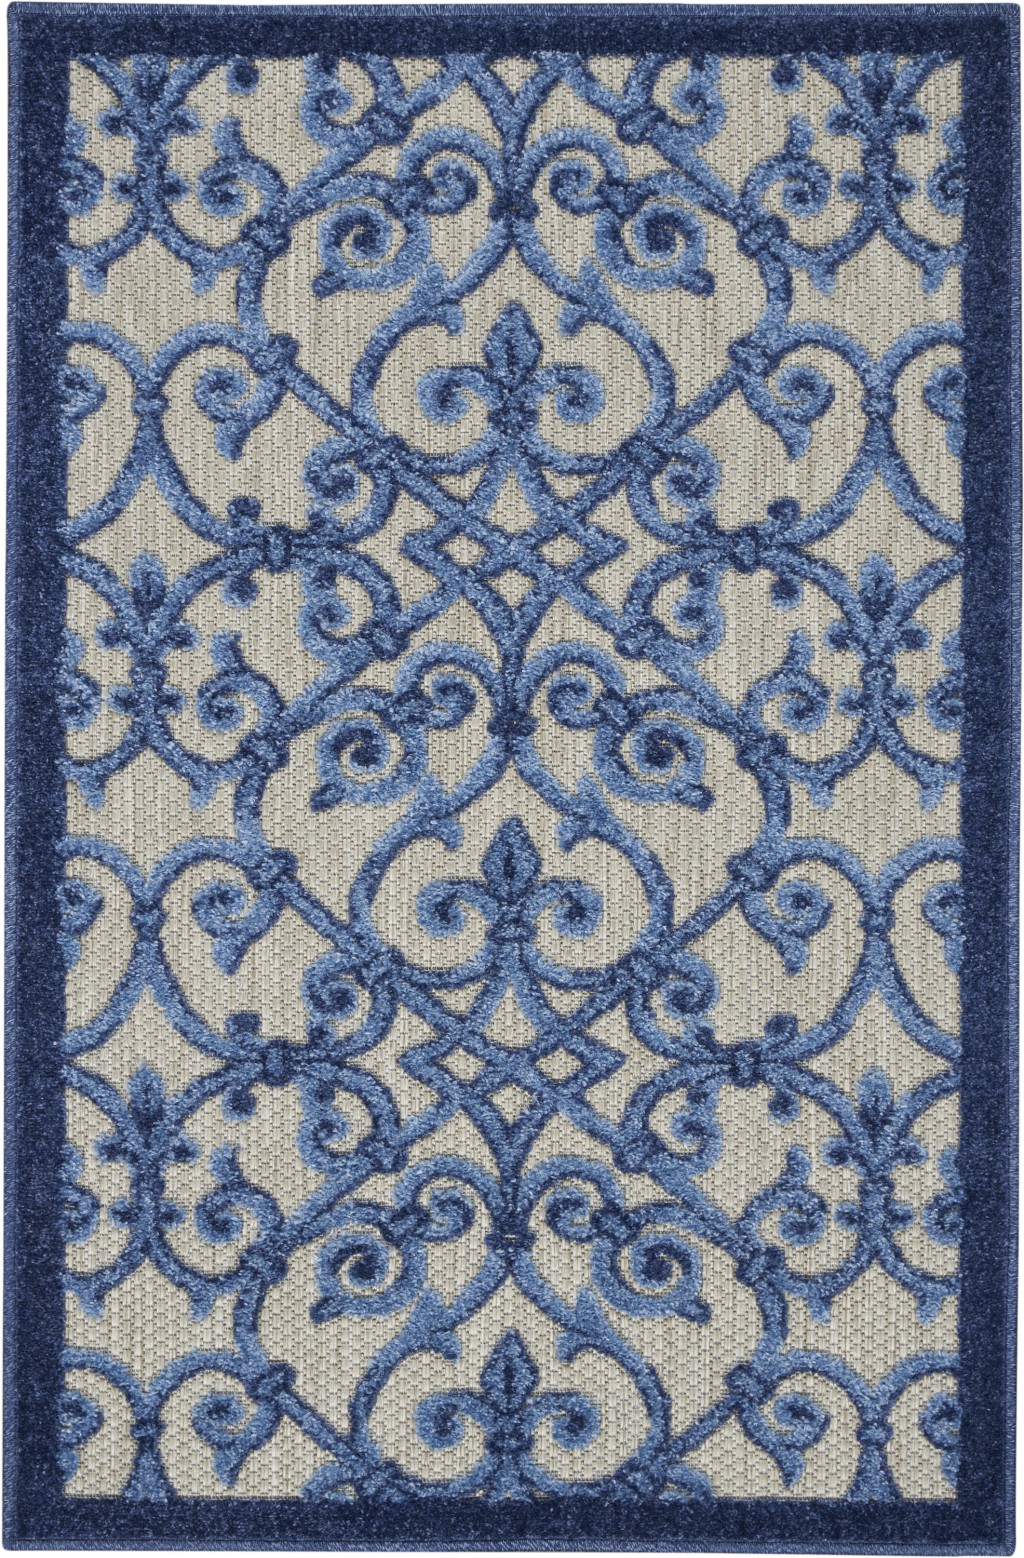 3' X 4' Blue And Gray Floral Indoor Outdoor Area Rug-385006-1